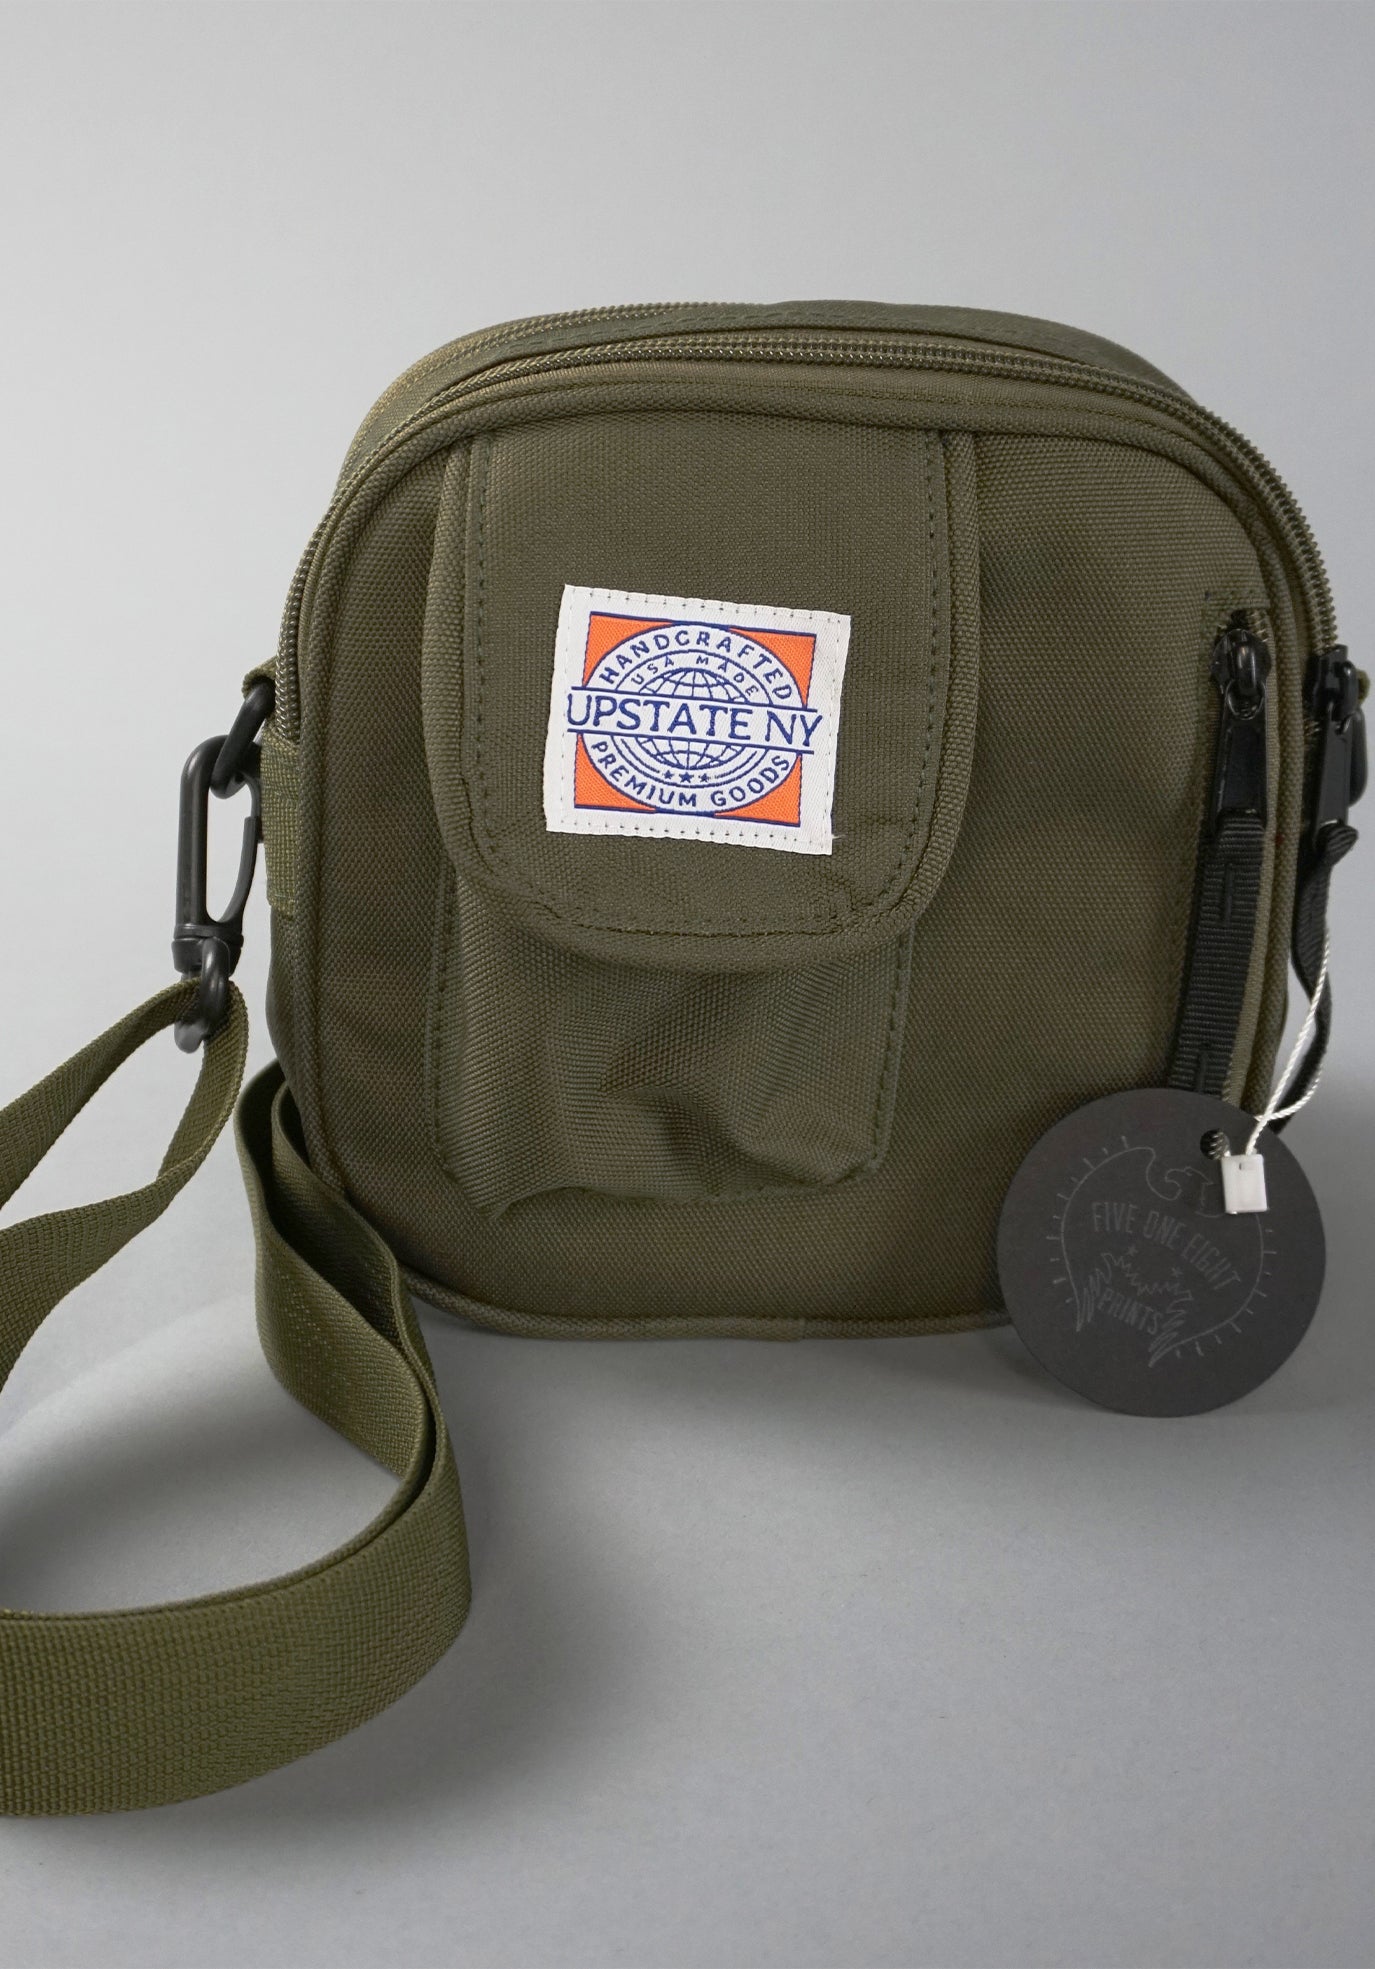 Essentials bag in olive green, showing detail of bag structure and custom Upstate NY sewn-on patch.